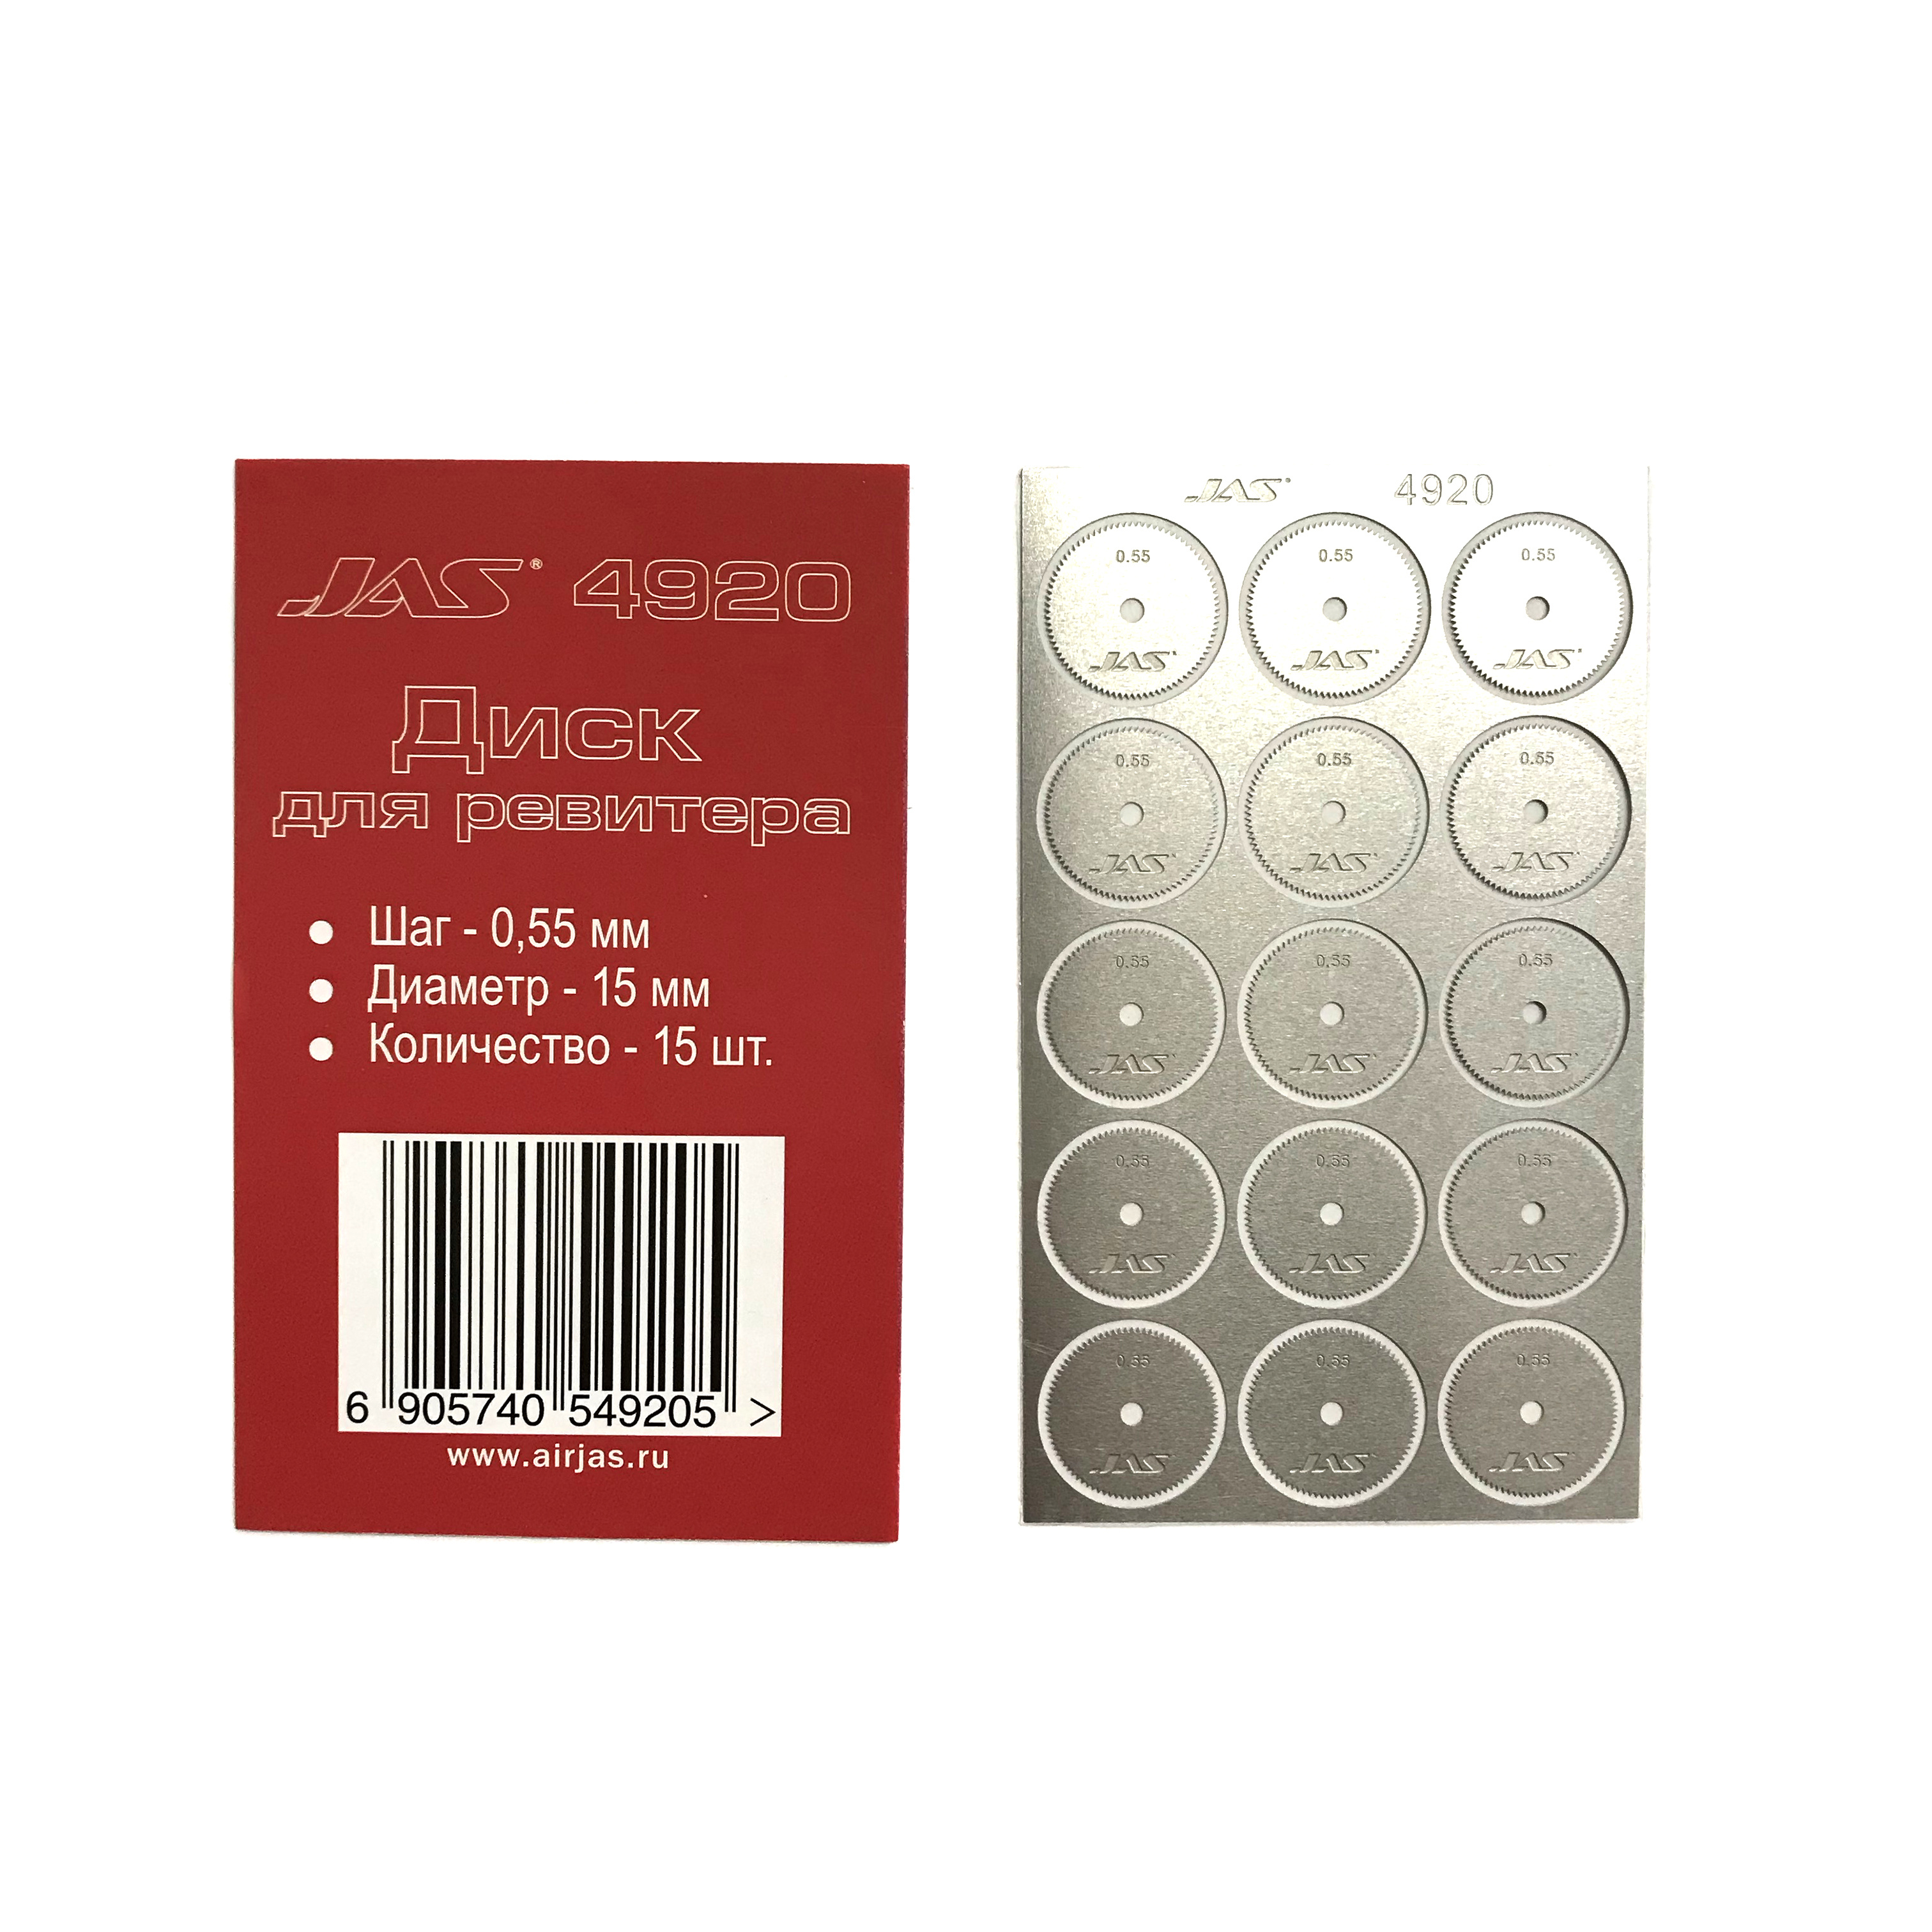 4920 JAS Disc for reviter d 15 mm, pitch 0.55 mm, 15 pieces.